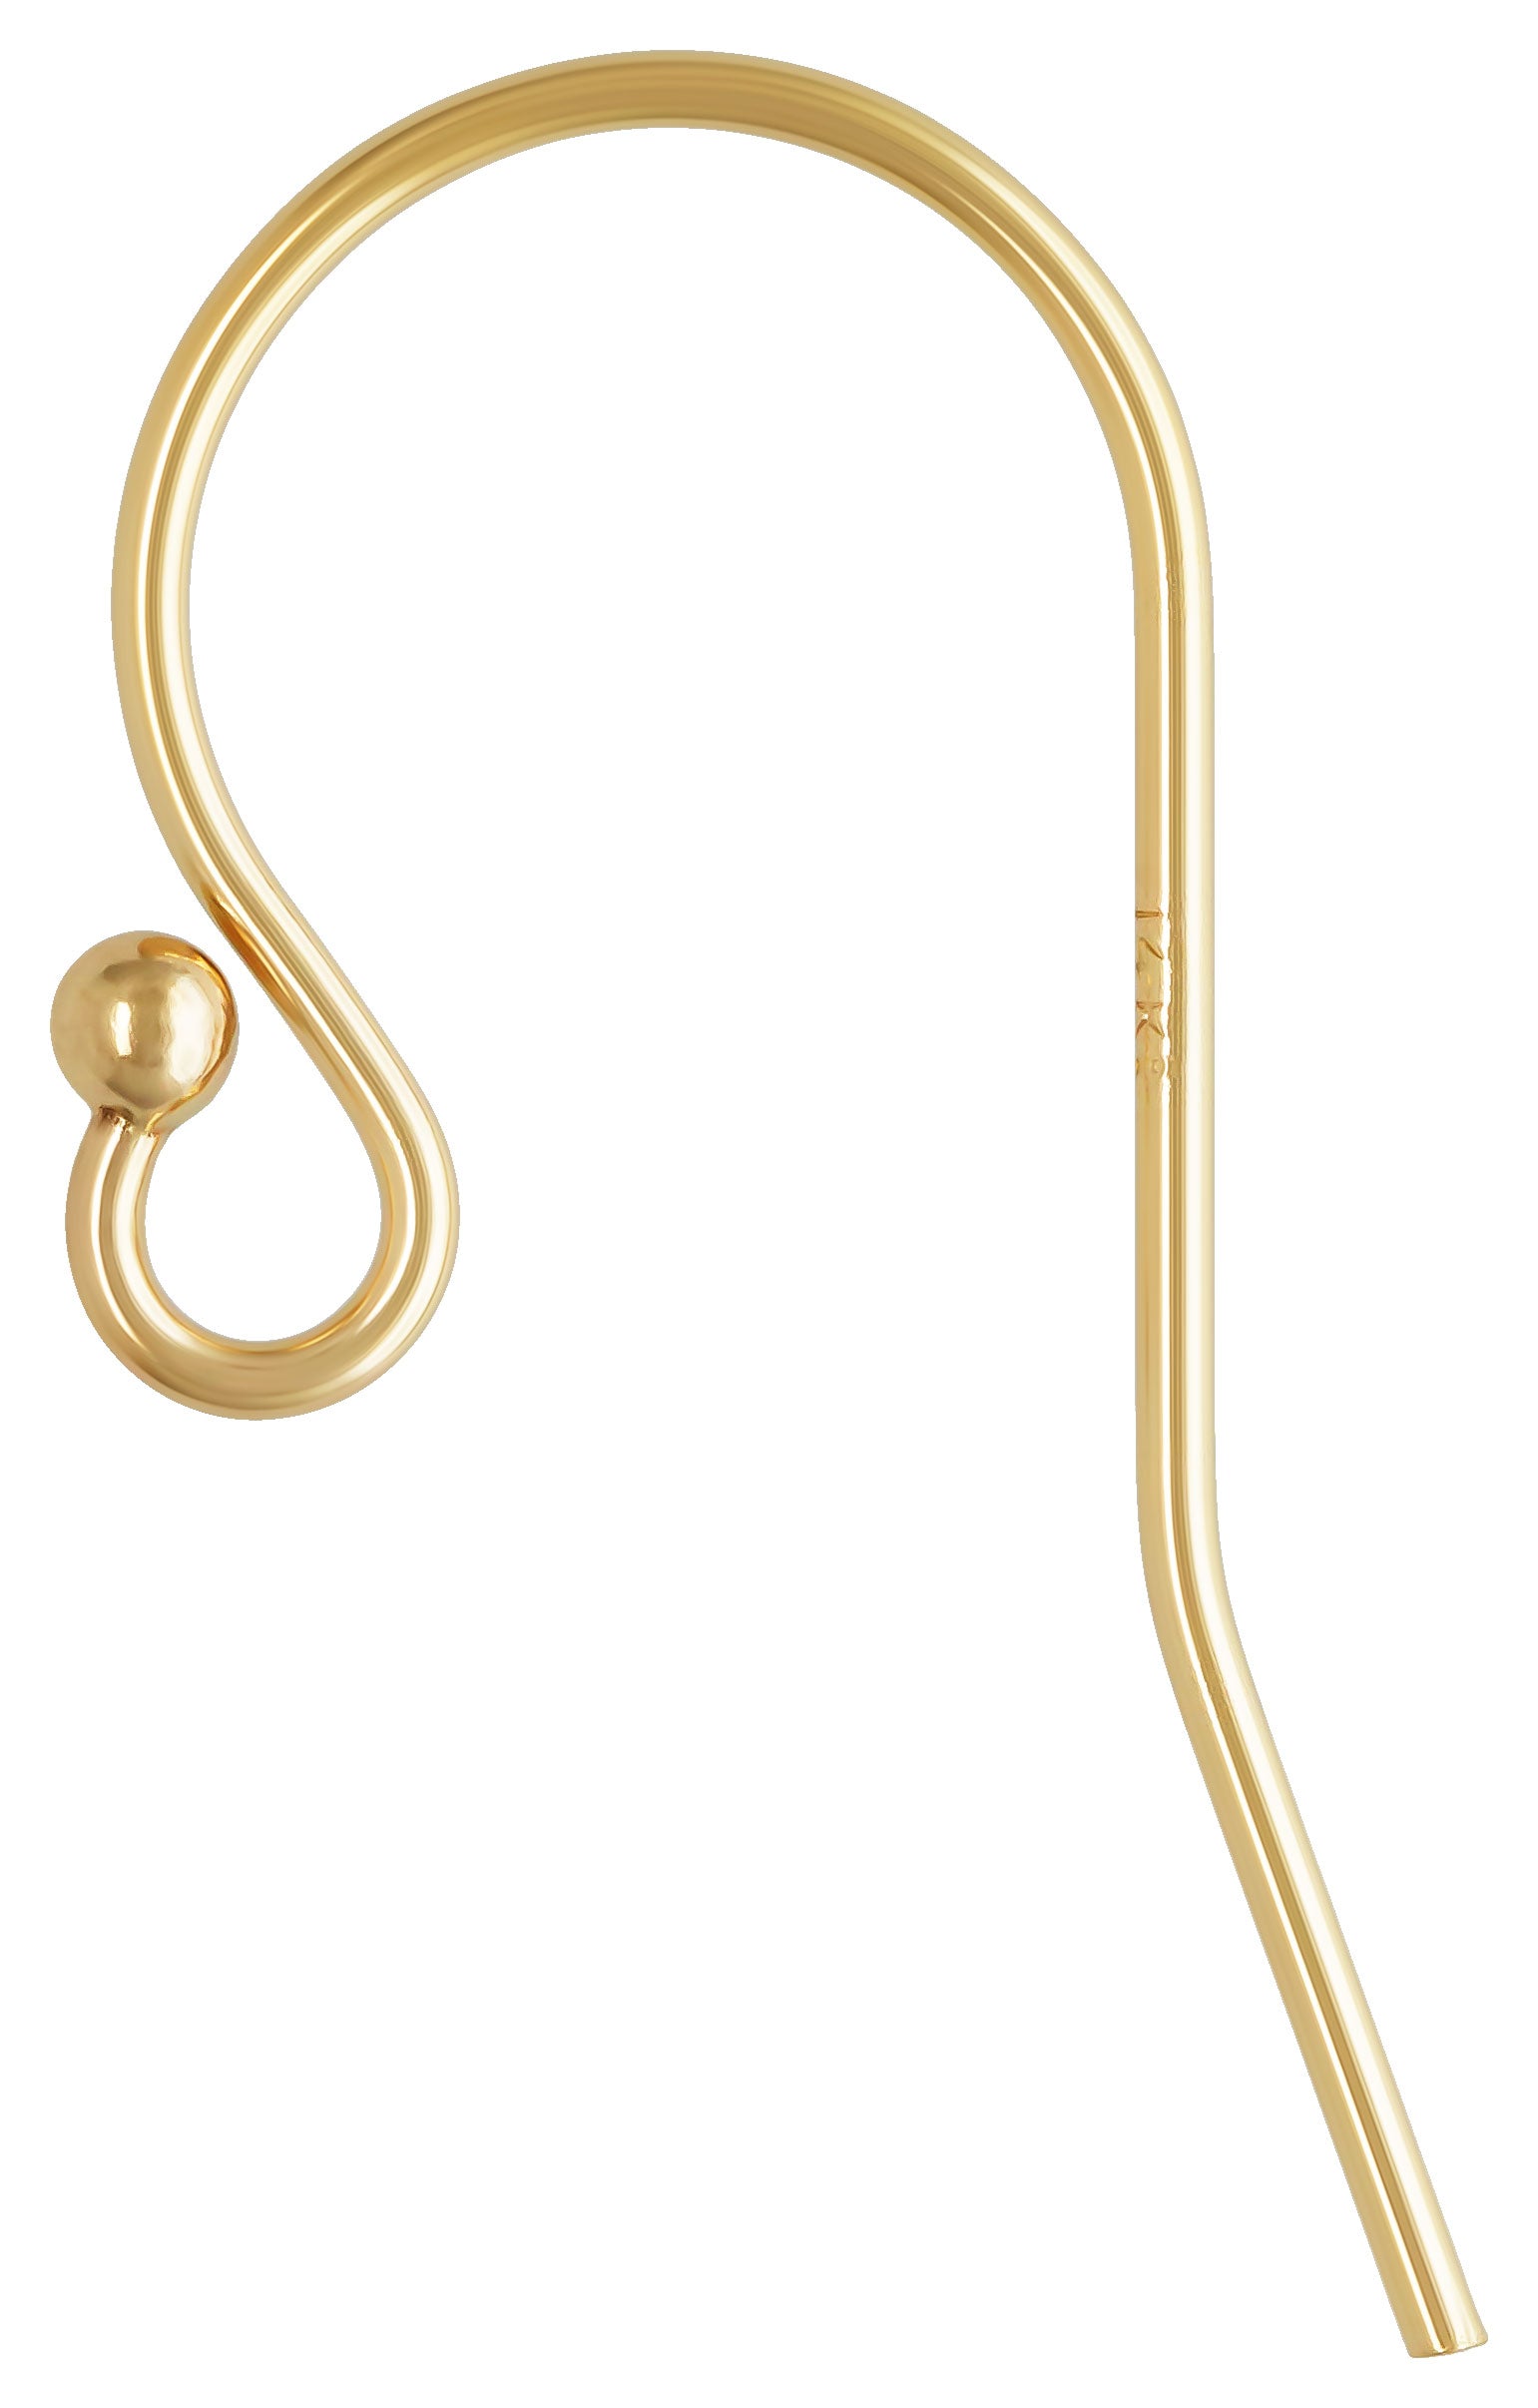 14K Gold Ear Wire Ball on tip Wire Hook, Jewelry Making, Earring Supplies,  Fishhook. Sold individually